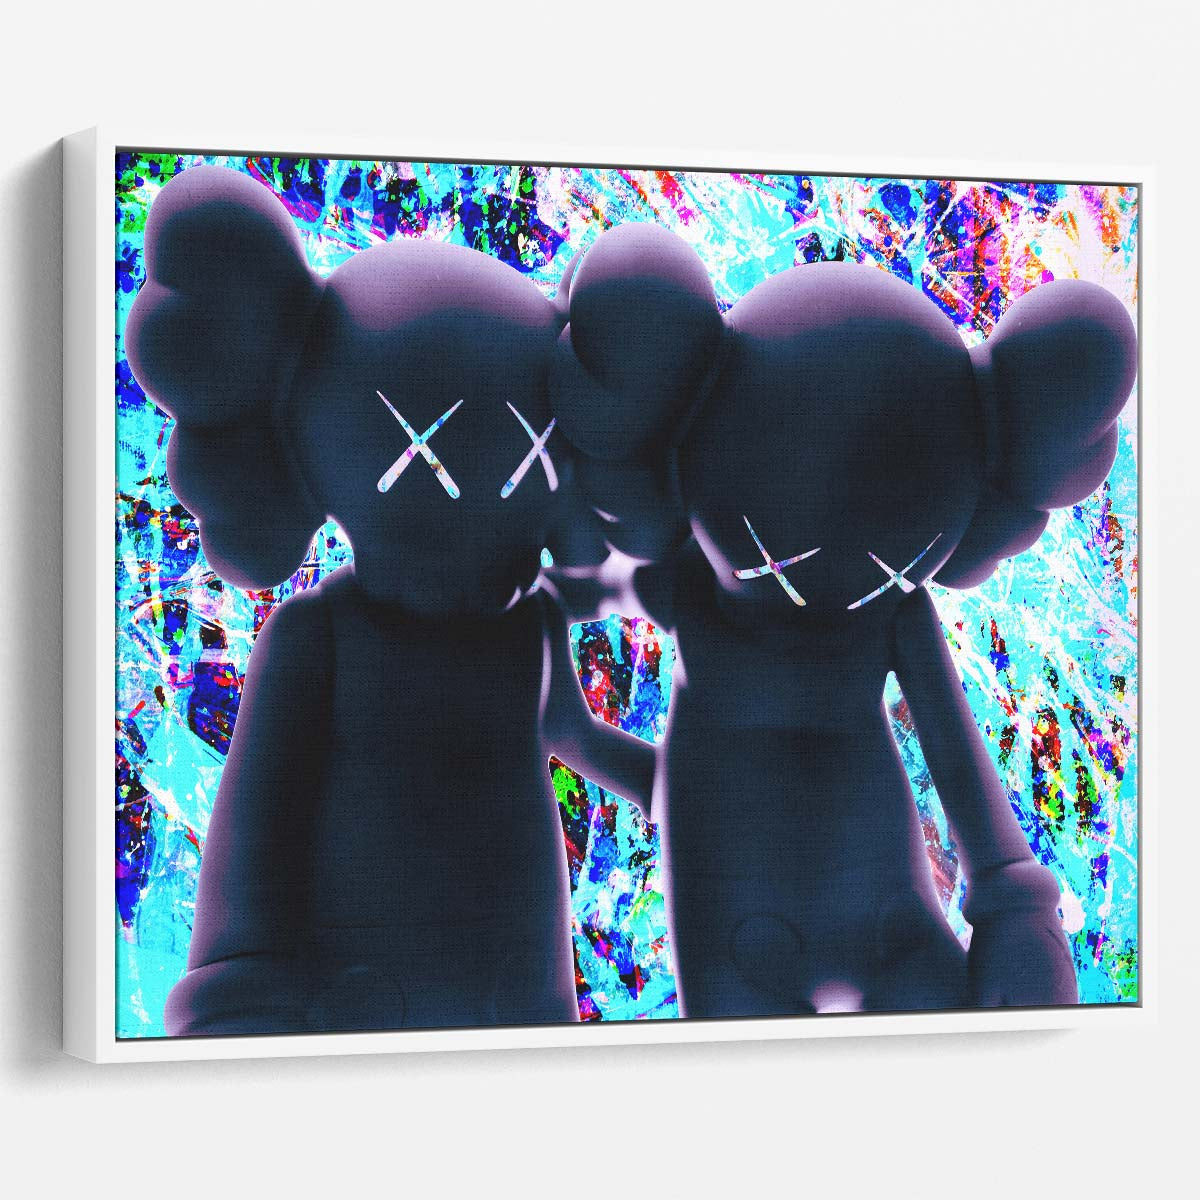 Two Kaws Figures Silhouette Hypebeast Wall Art by Luxuriance Designs. Made in USA.